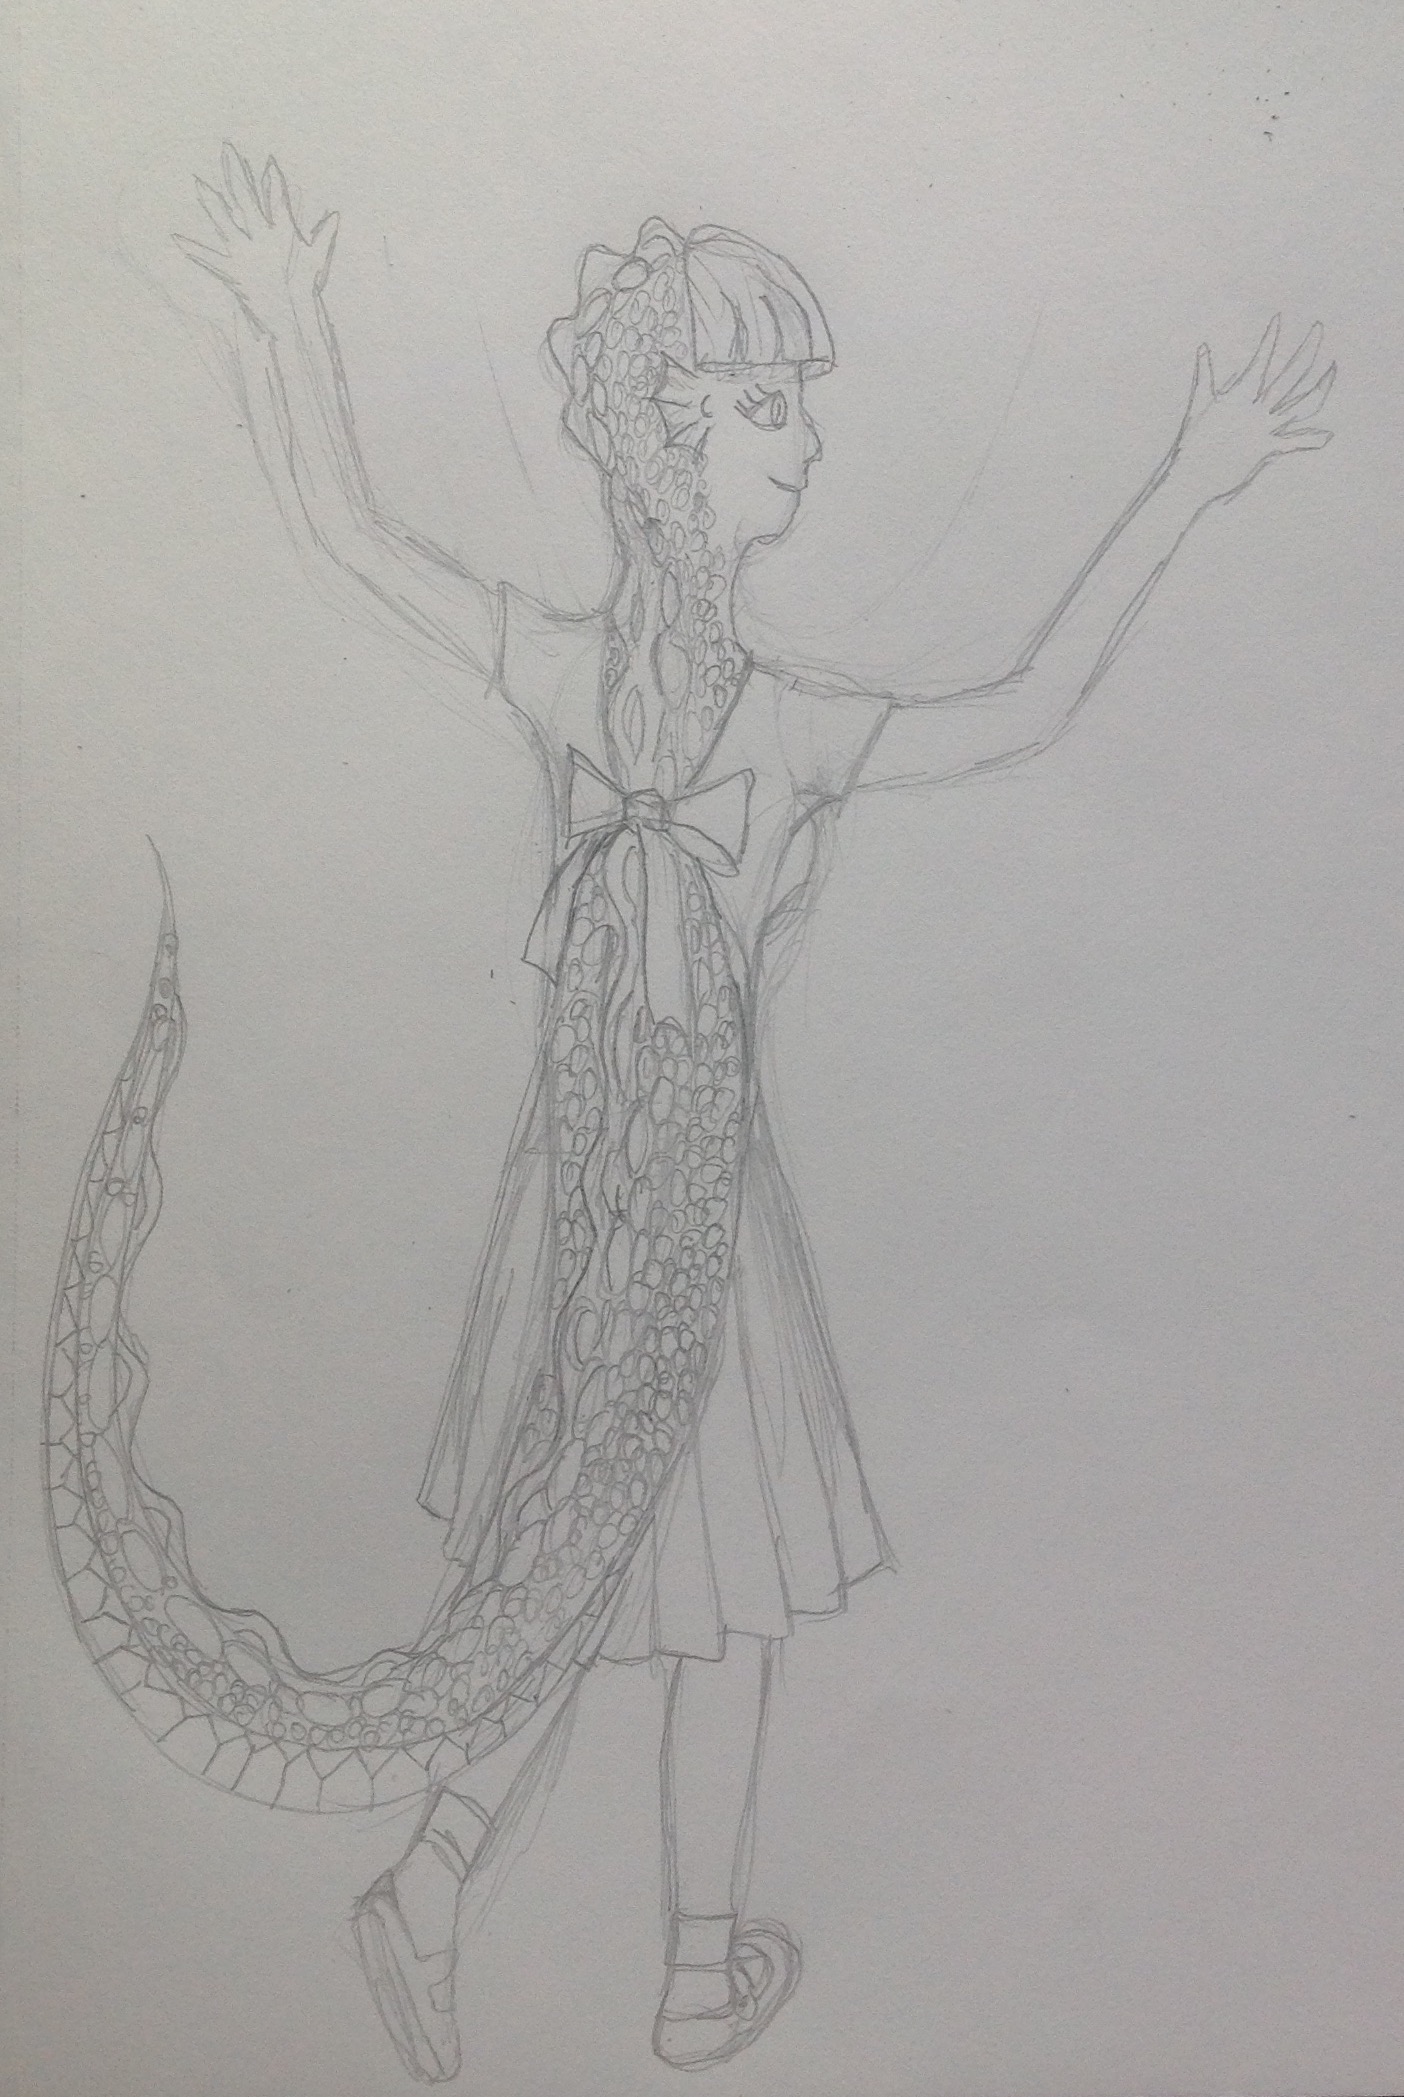 Audrey back scales speculation full body version by Jadis